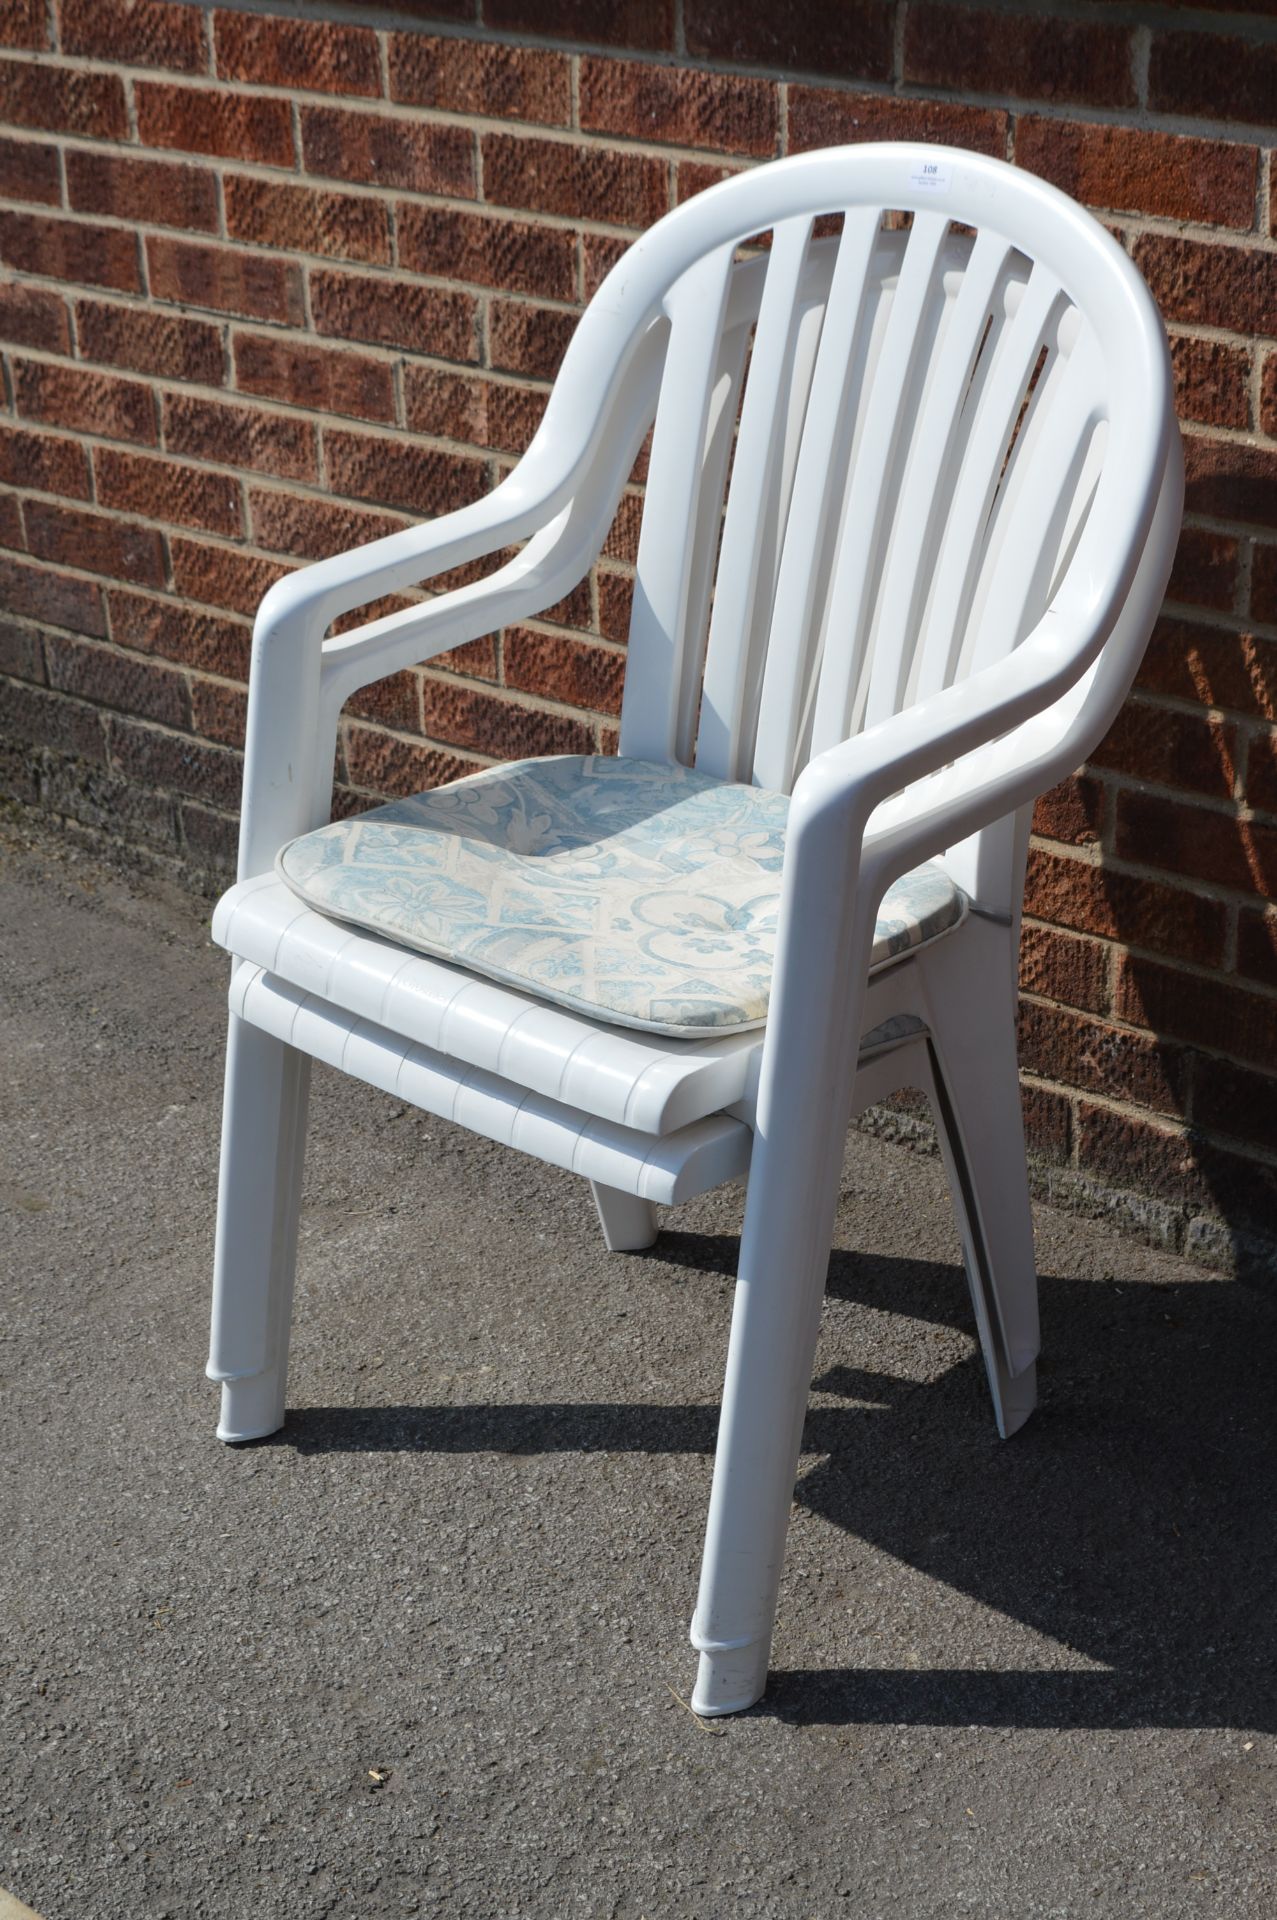 Two White Plastic Garden Chairs